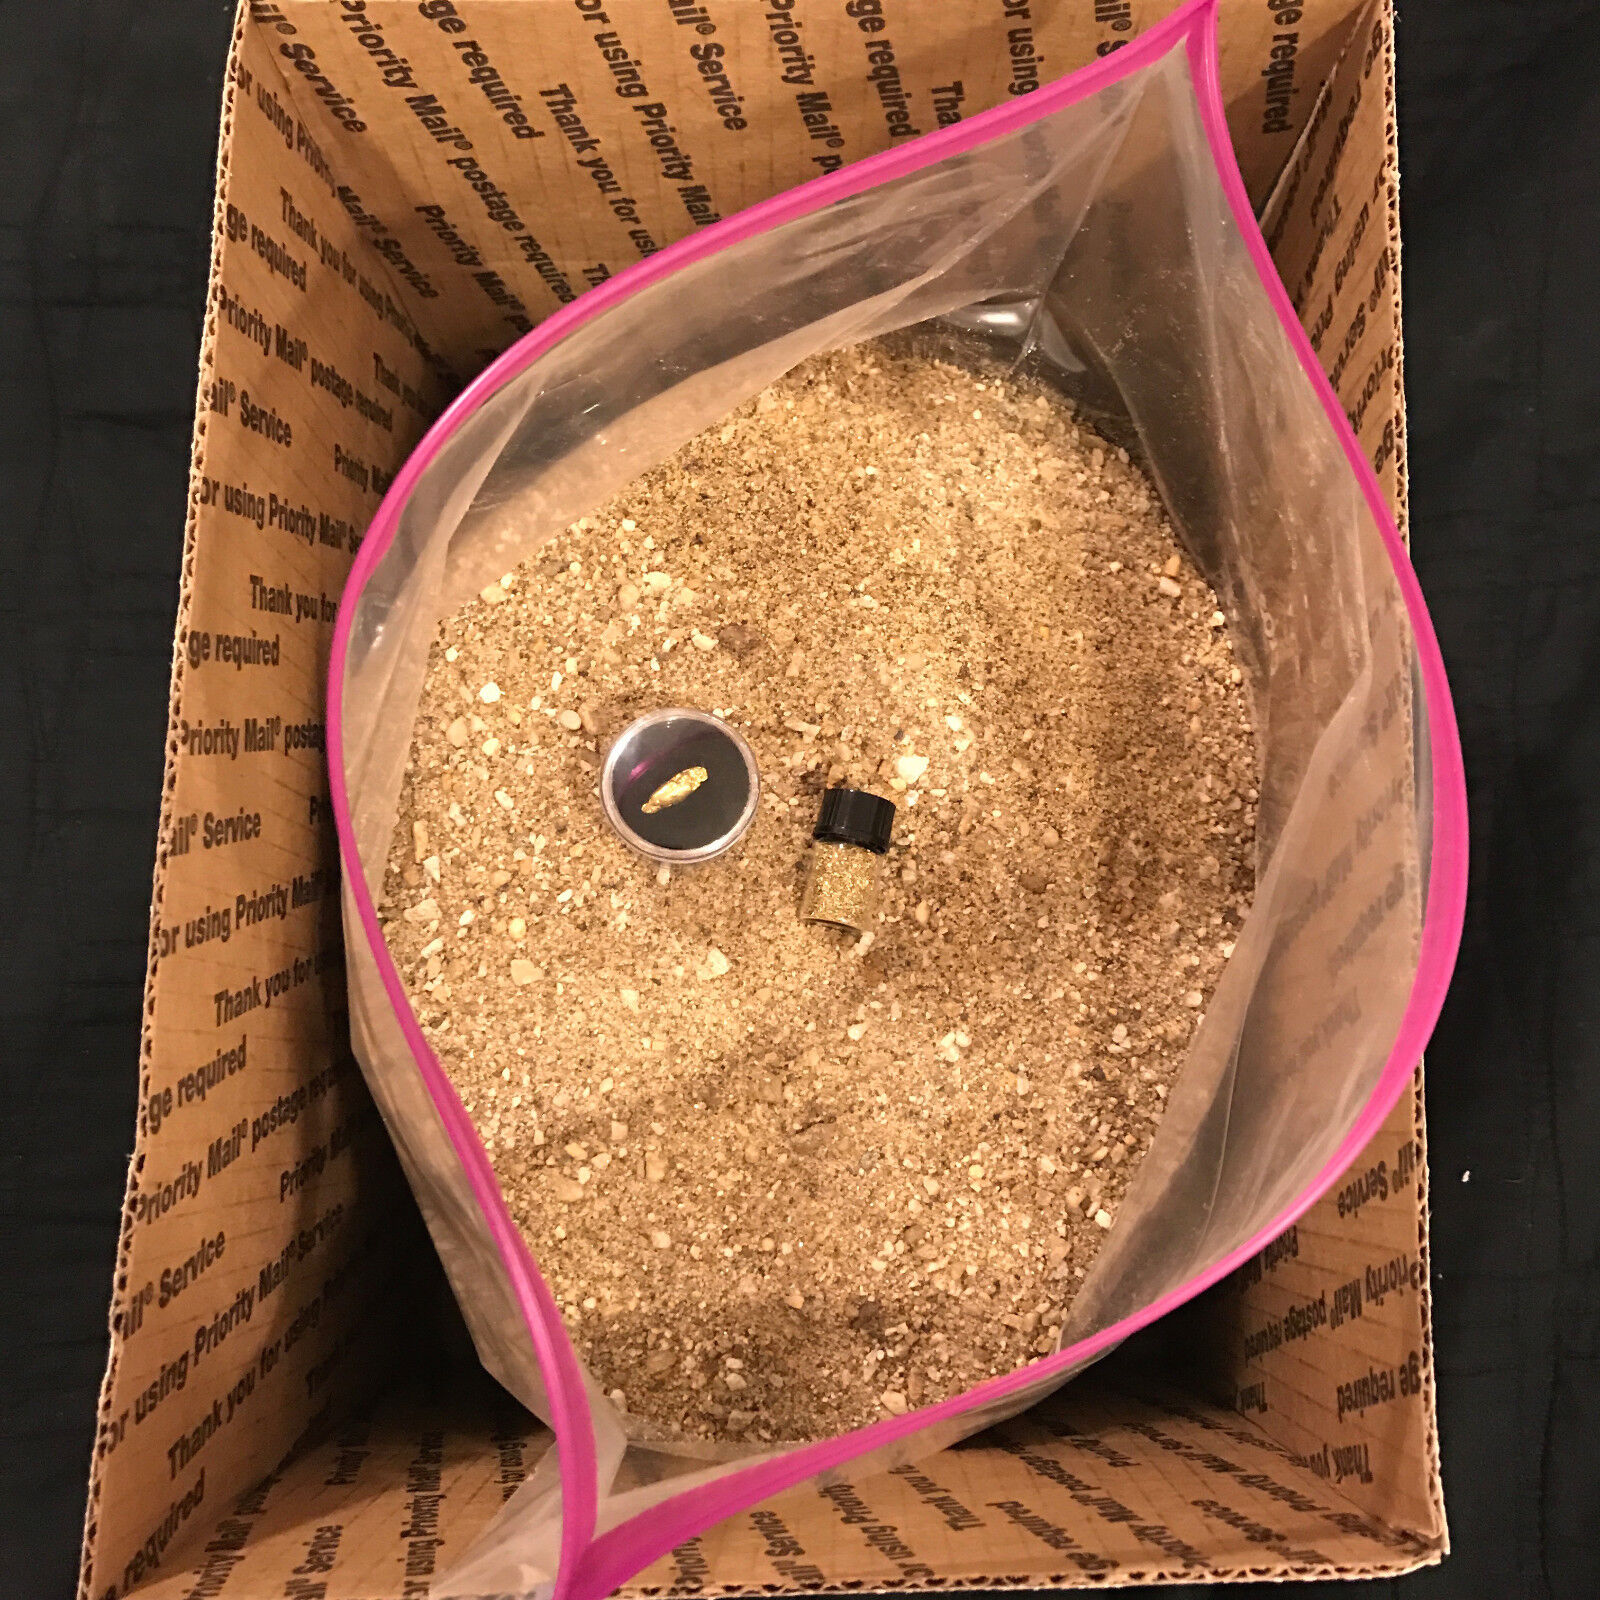 Rich Gold Nugget Pay Dirt Approximately 20-30lbs OF UNSEARCHED PAYDIRT